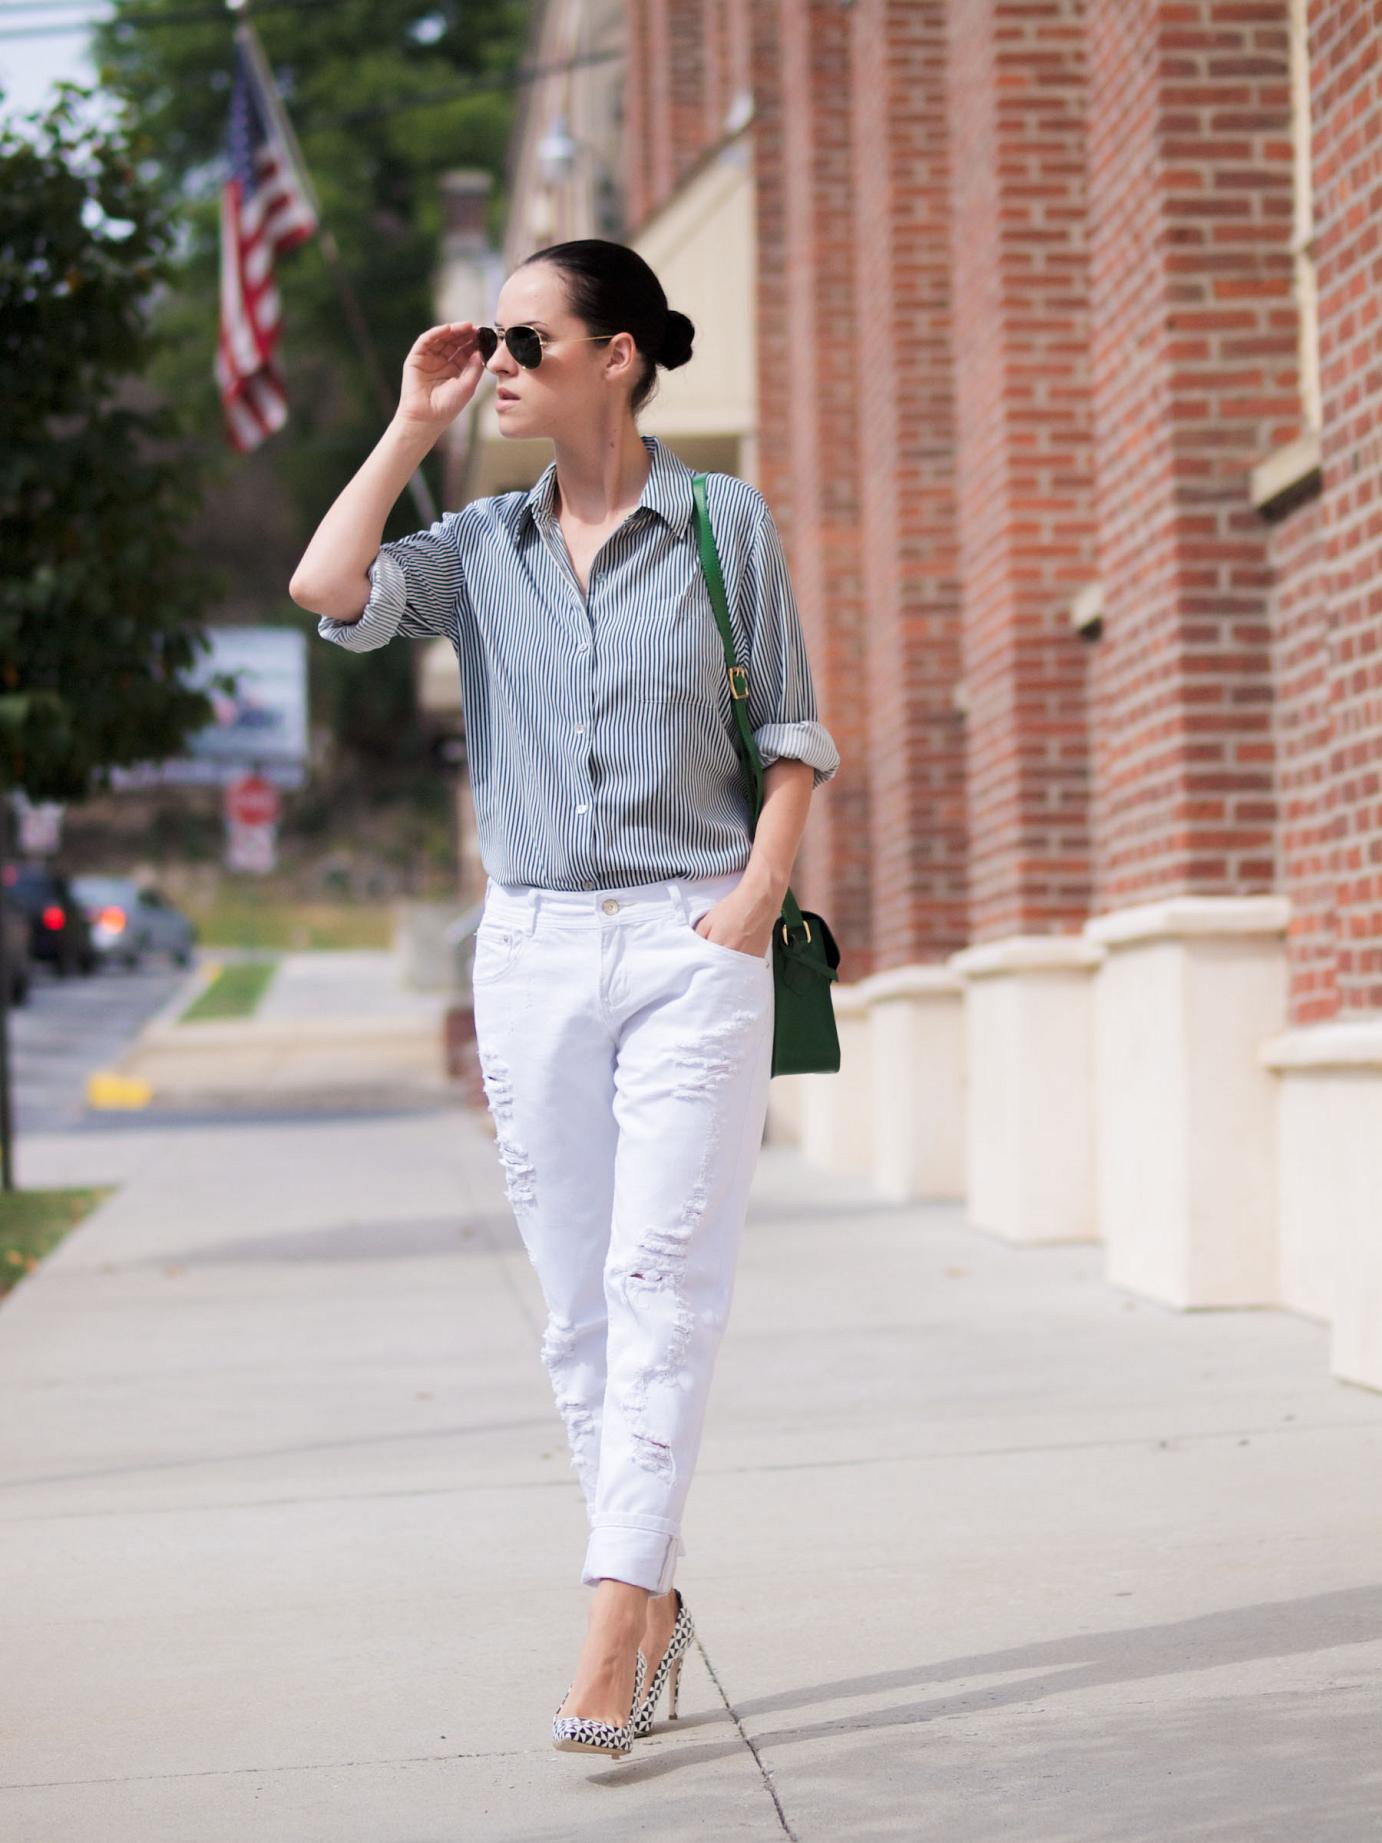 BITTERSWEET COLOURS, angela Roi bag, green bag, boyfriend jeans, white jeans, j.crew shoes, stripes, street style. ray ban, lord and taylor, 